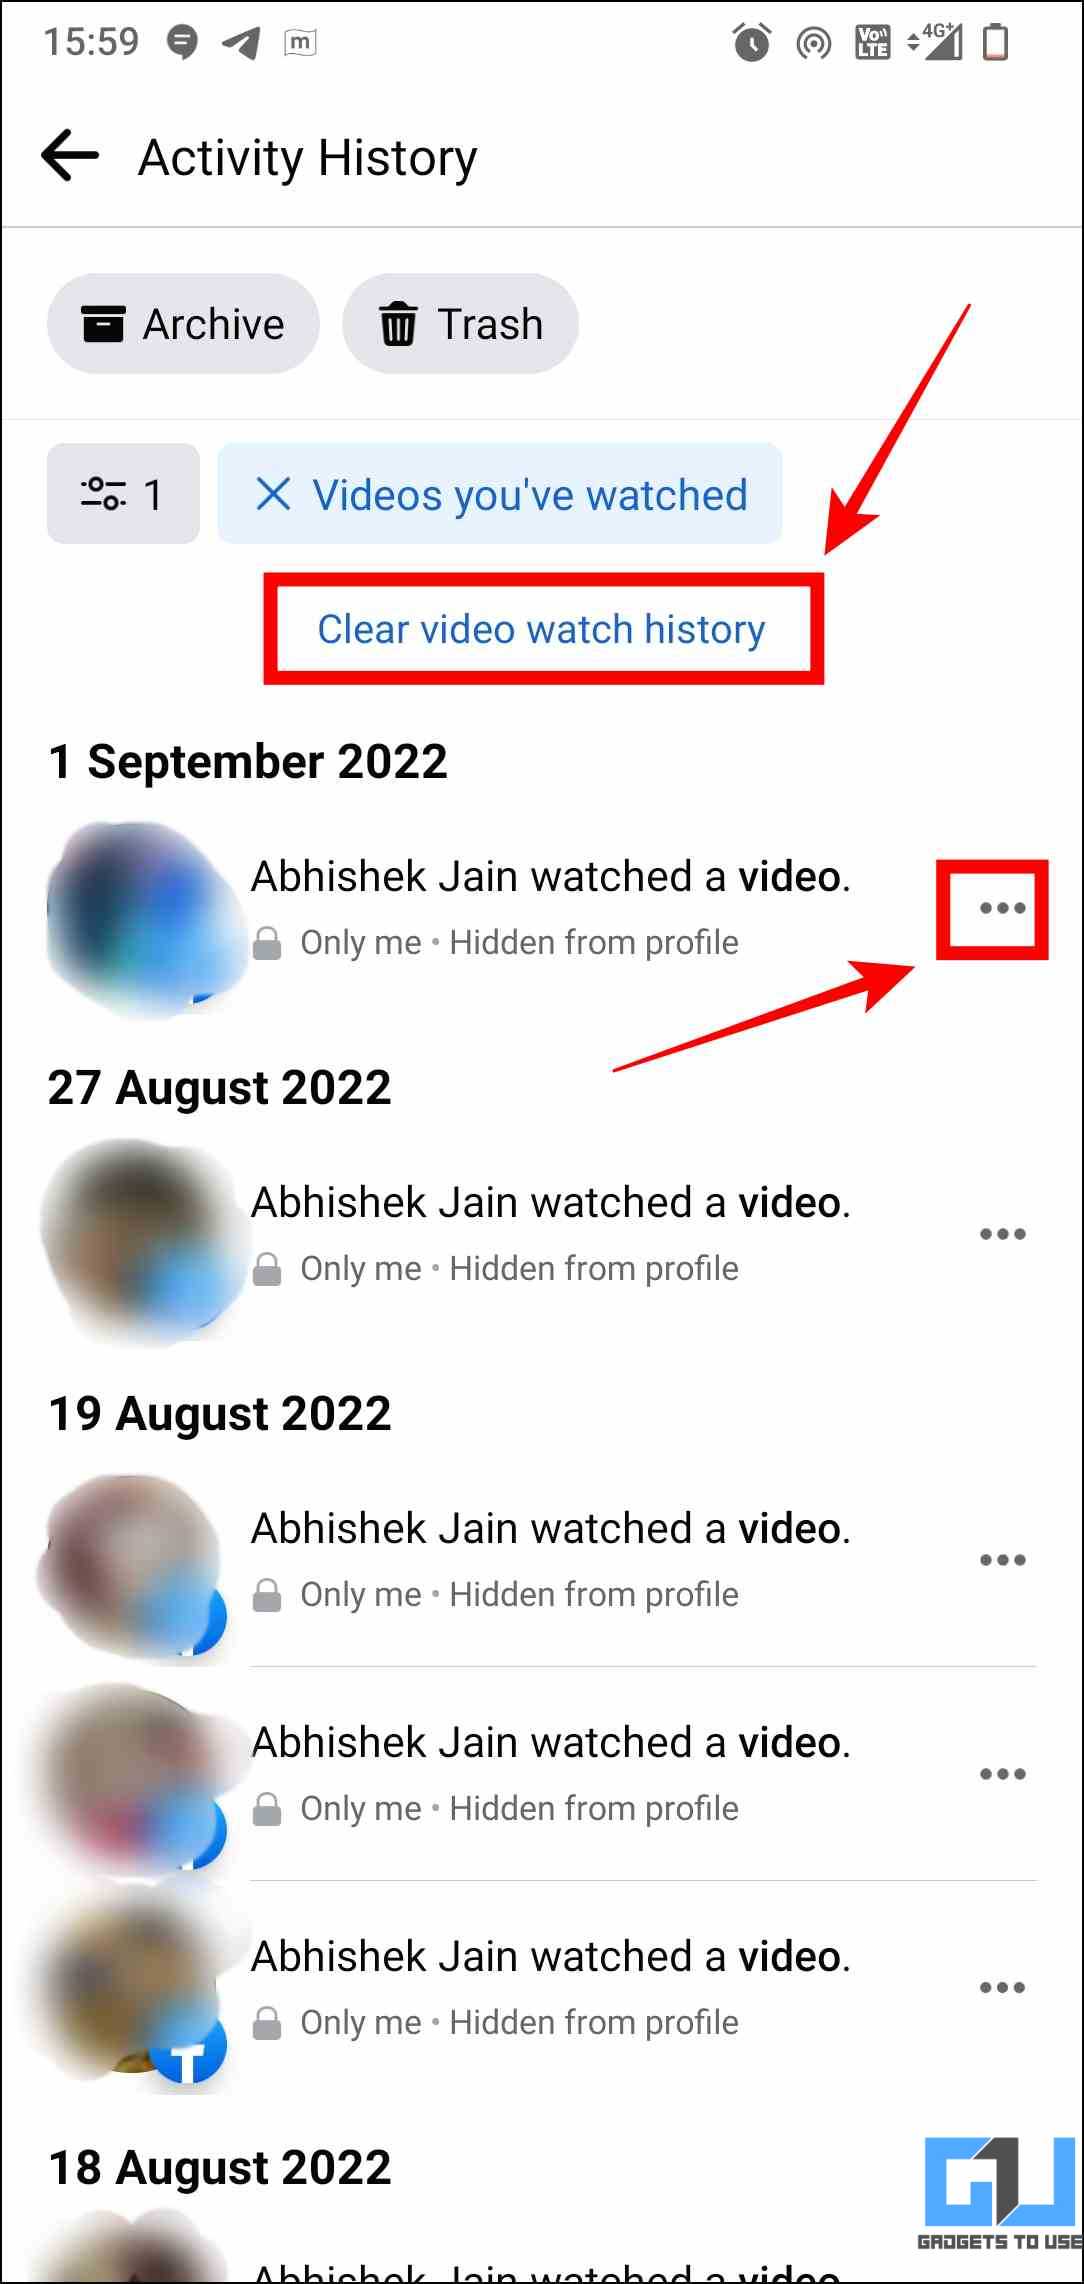 delete facebook watch and search history